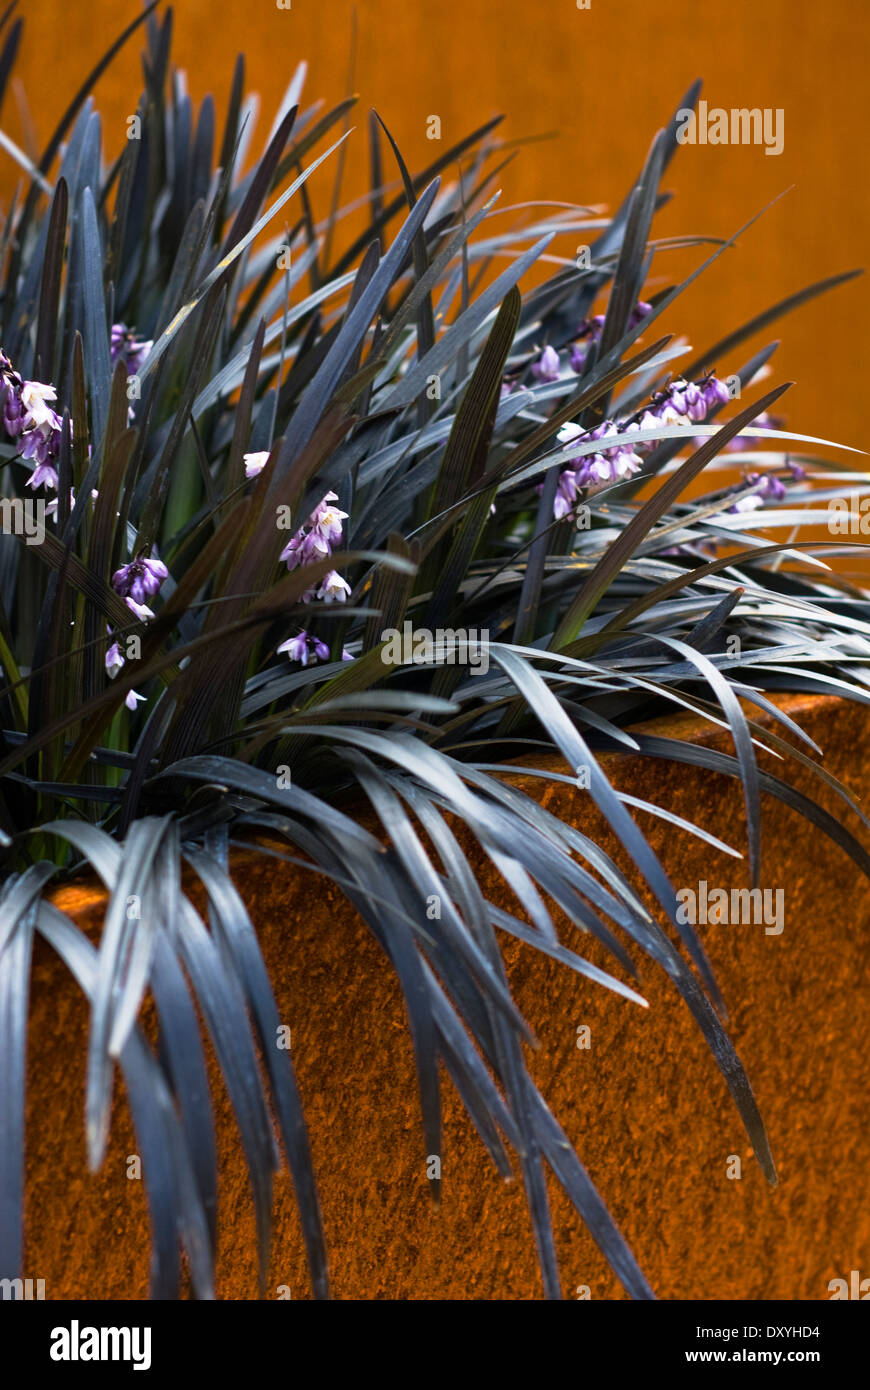 Ophiopogon planiscapus 'Nigrescens', Snakes's Beard. Perennial. Black foliage and purple flowers in metal container. Stock Photo